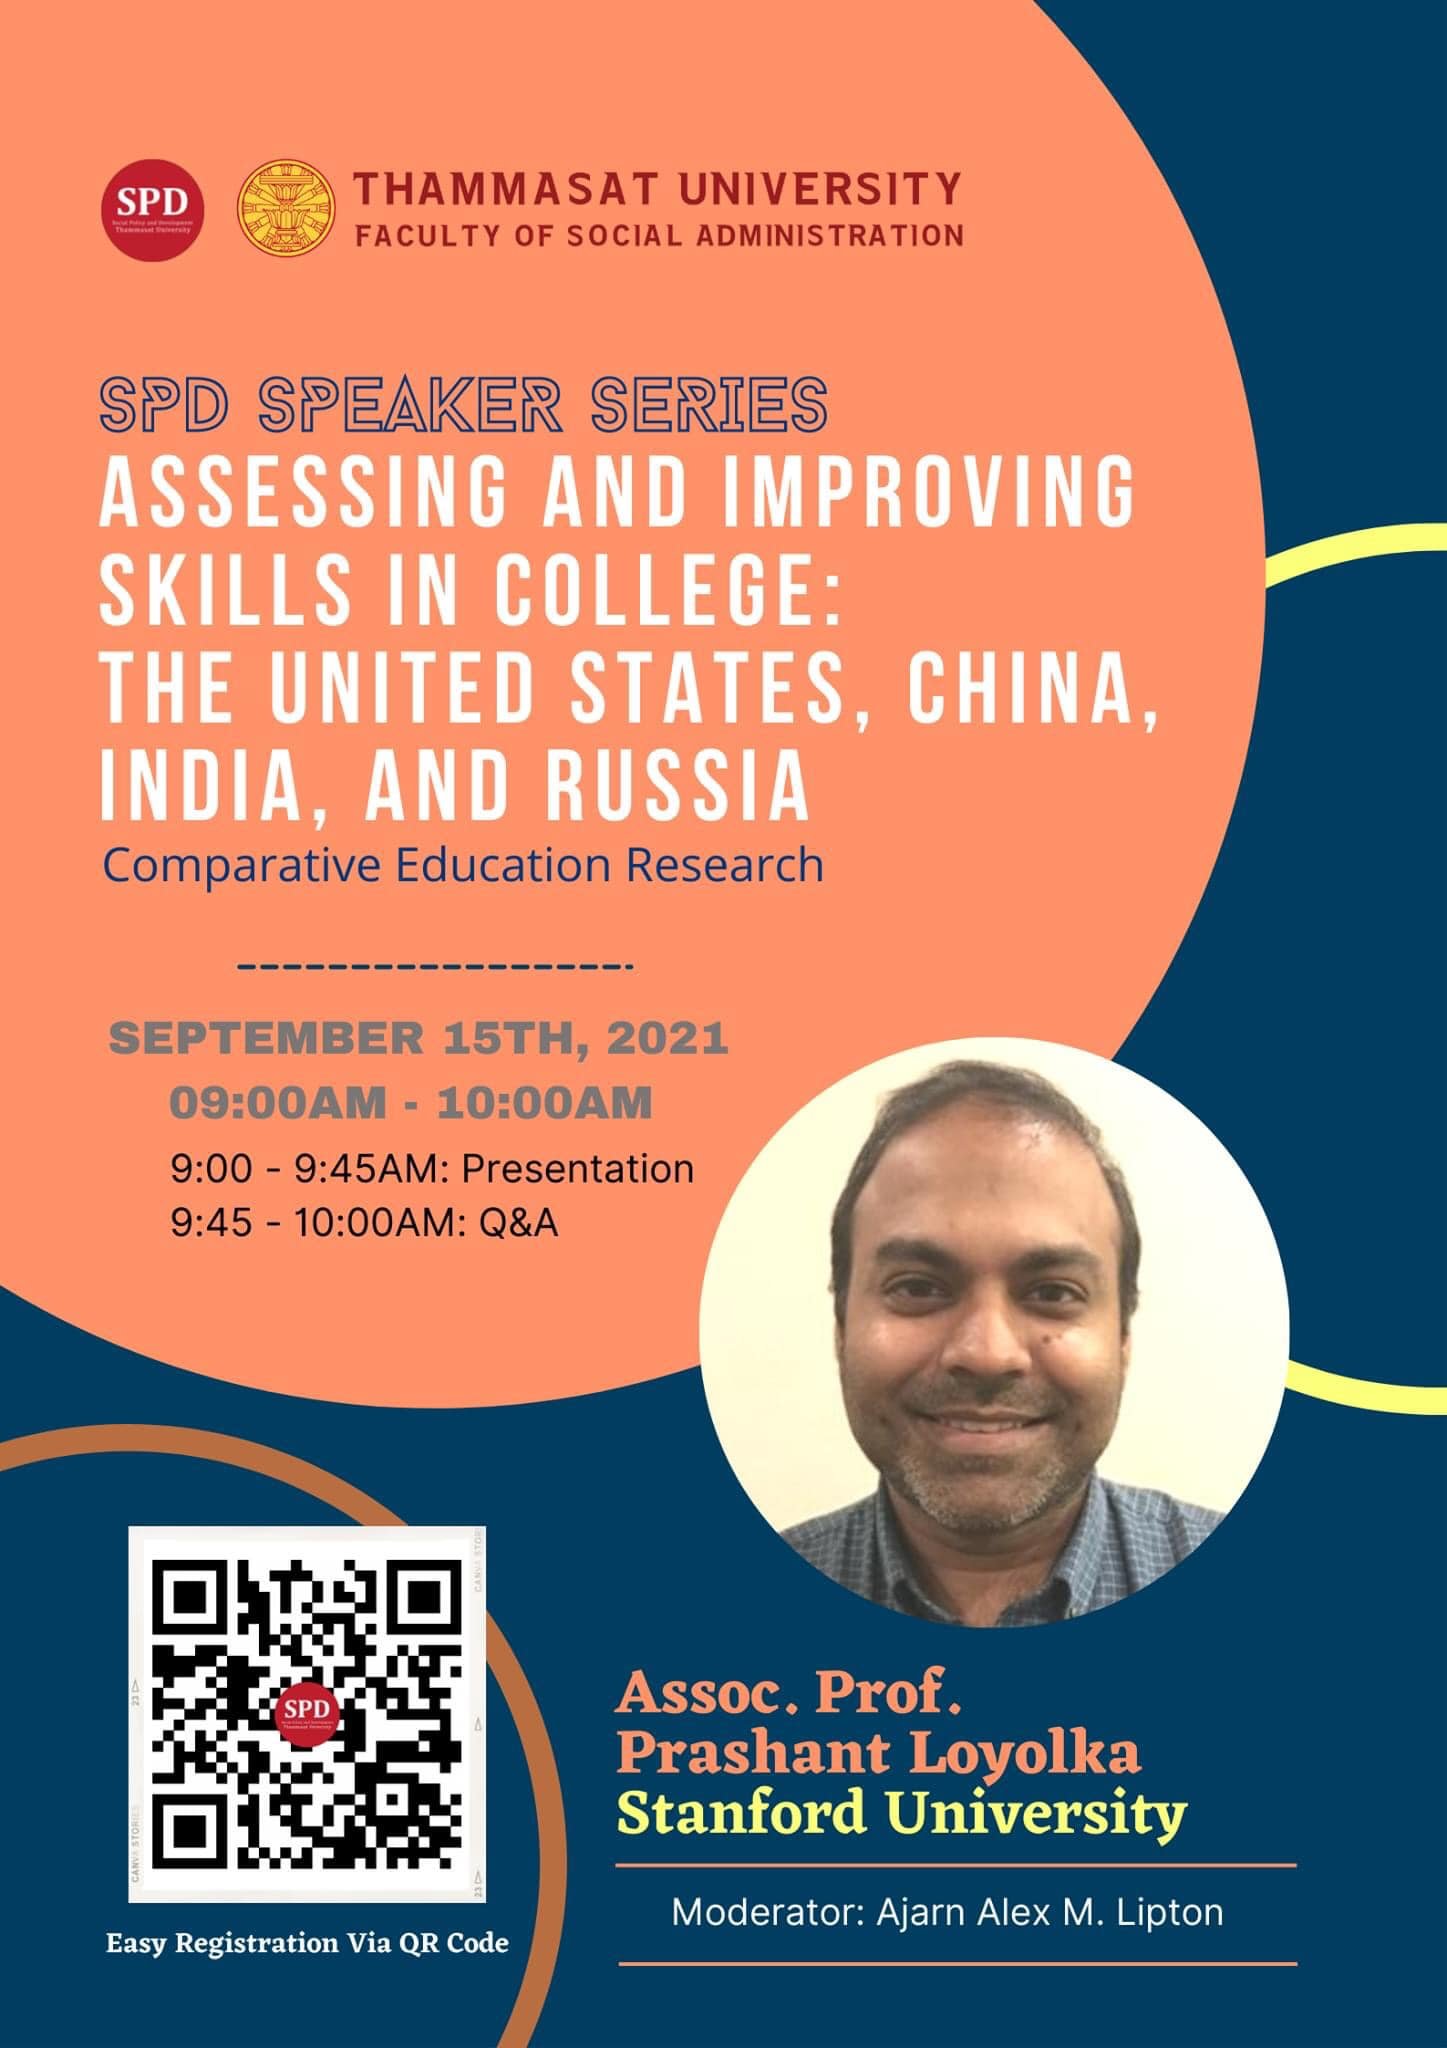 SPD Speaker Series "Assessing and Improving Skills in College: The United States, China, India and Russia"